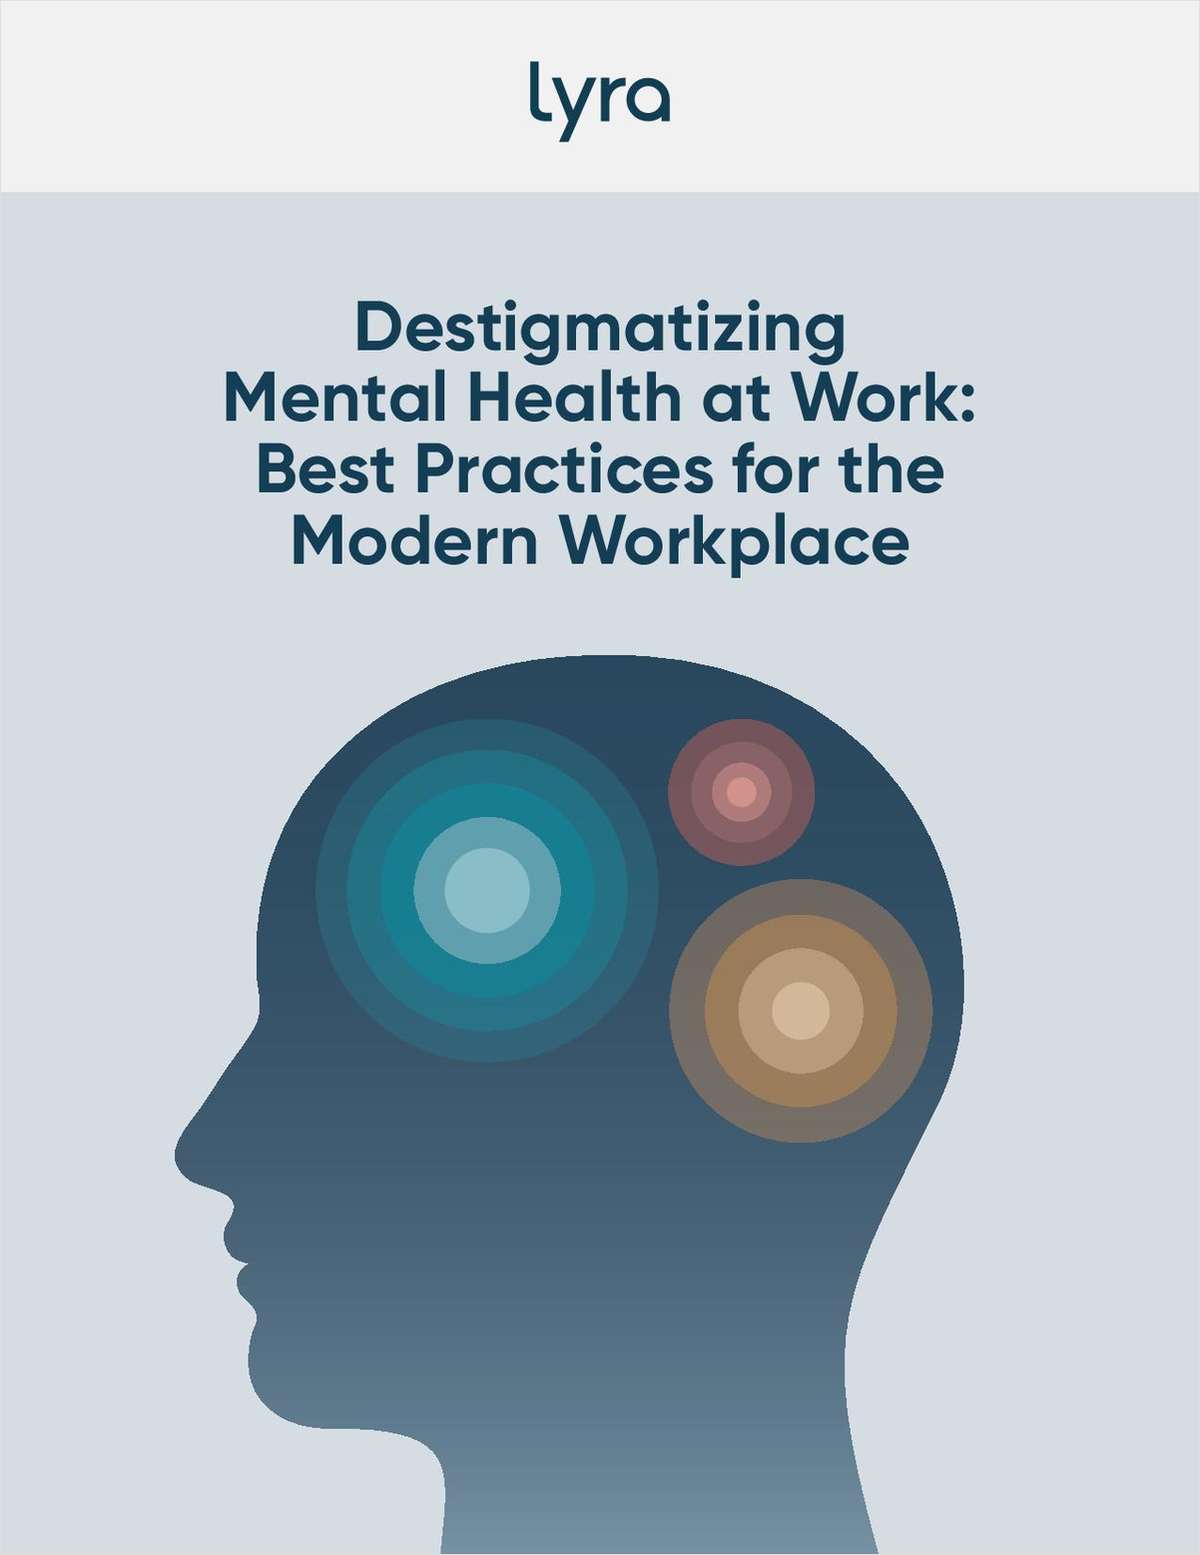 De-Stigmatizing Mental Health at Work: Best Practices for the Modern Workplace